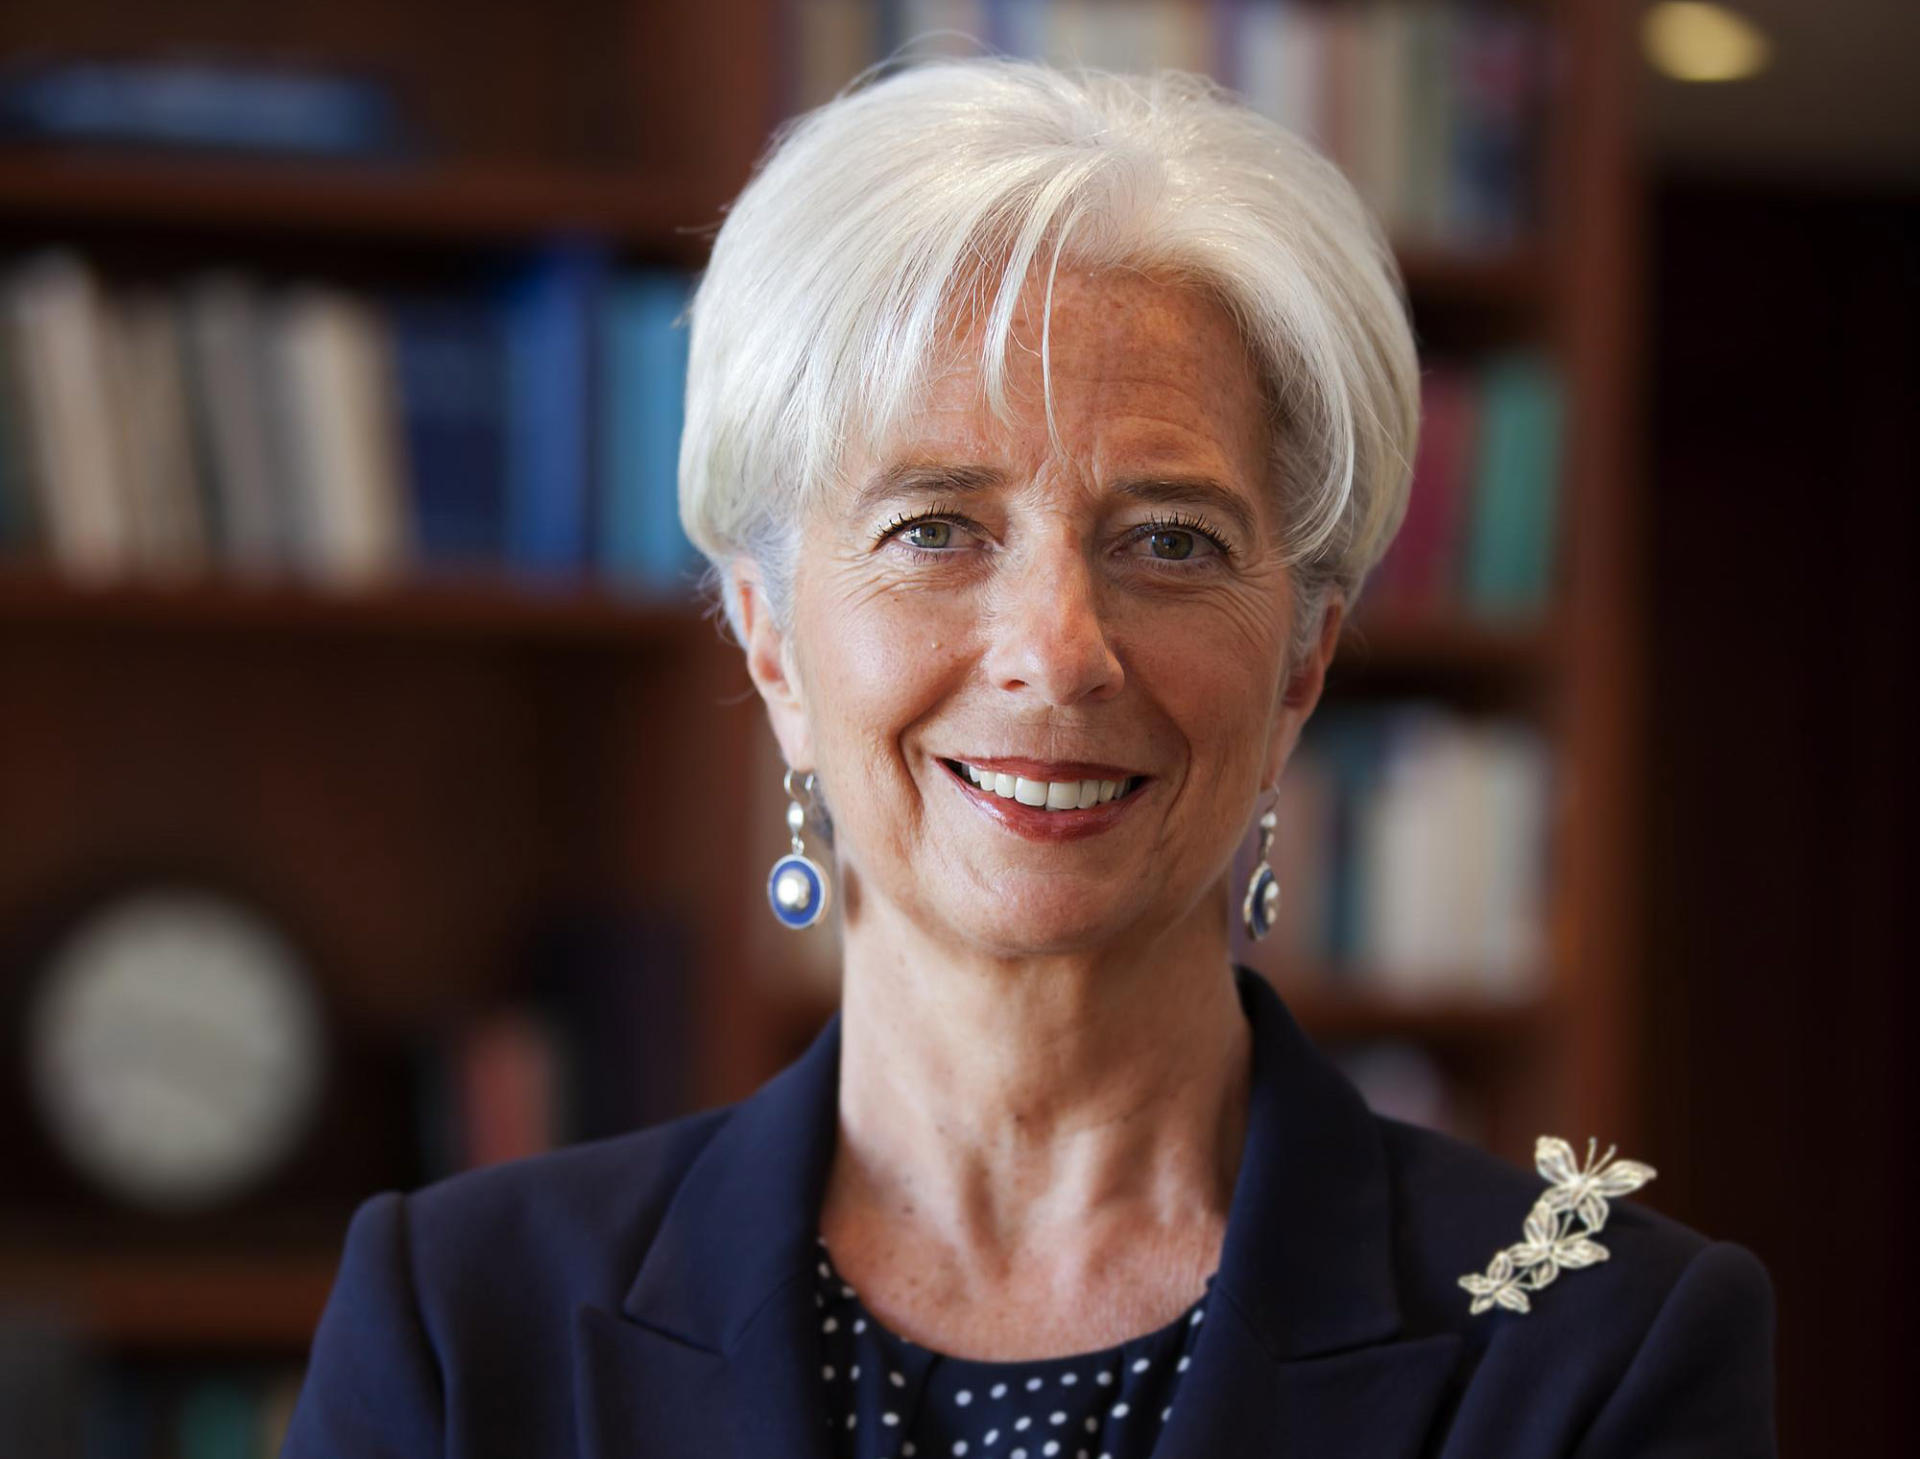 Incoming ECB President Lagarde: Trade tensions biggest threat to global economy